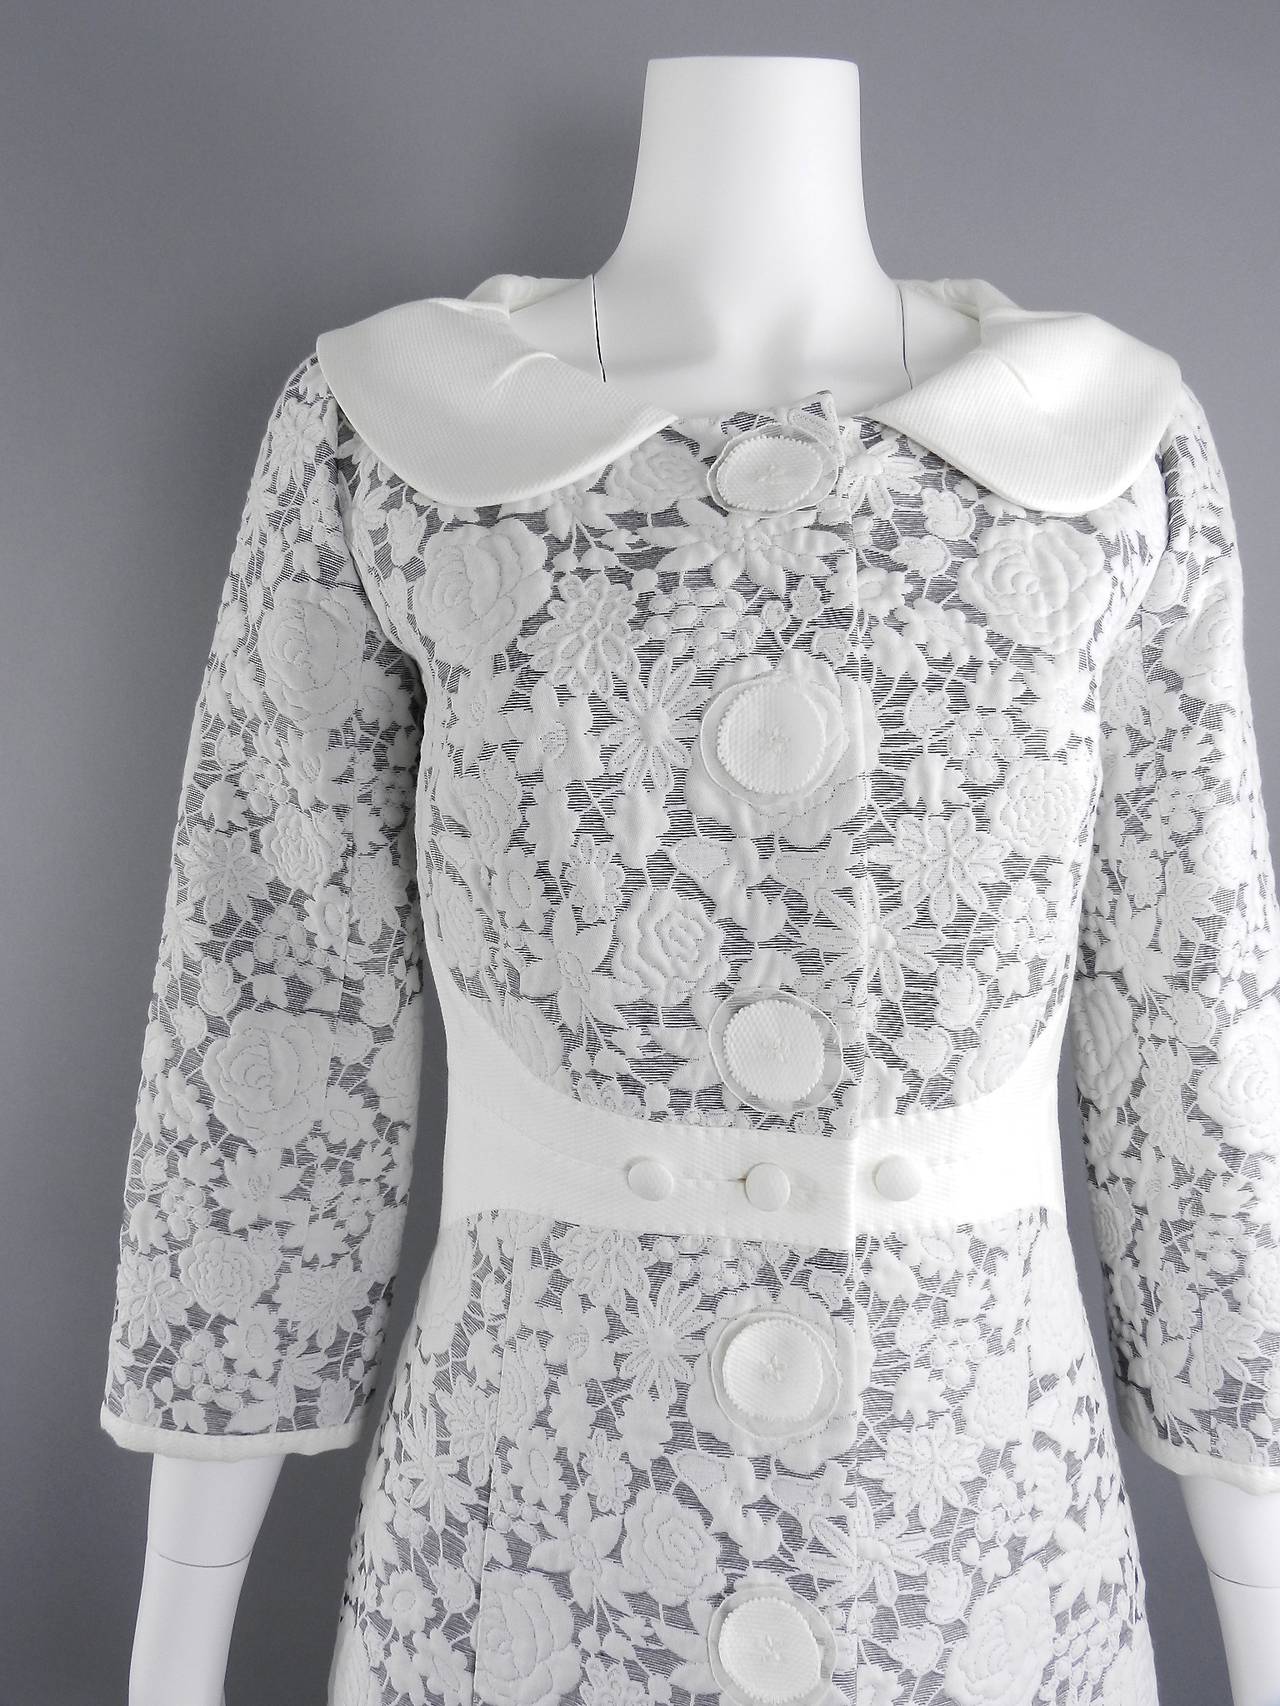 Louis Vuitton white cotton floral jacket. Textured illusion lace with peter pan collar and snap closures down front. Excellent clean condition. Tagged size FR 38 (USA 6) to fit 34